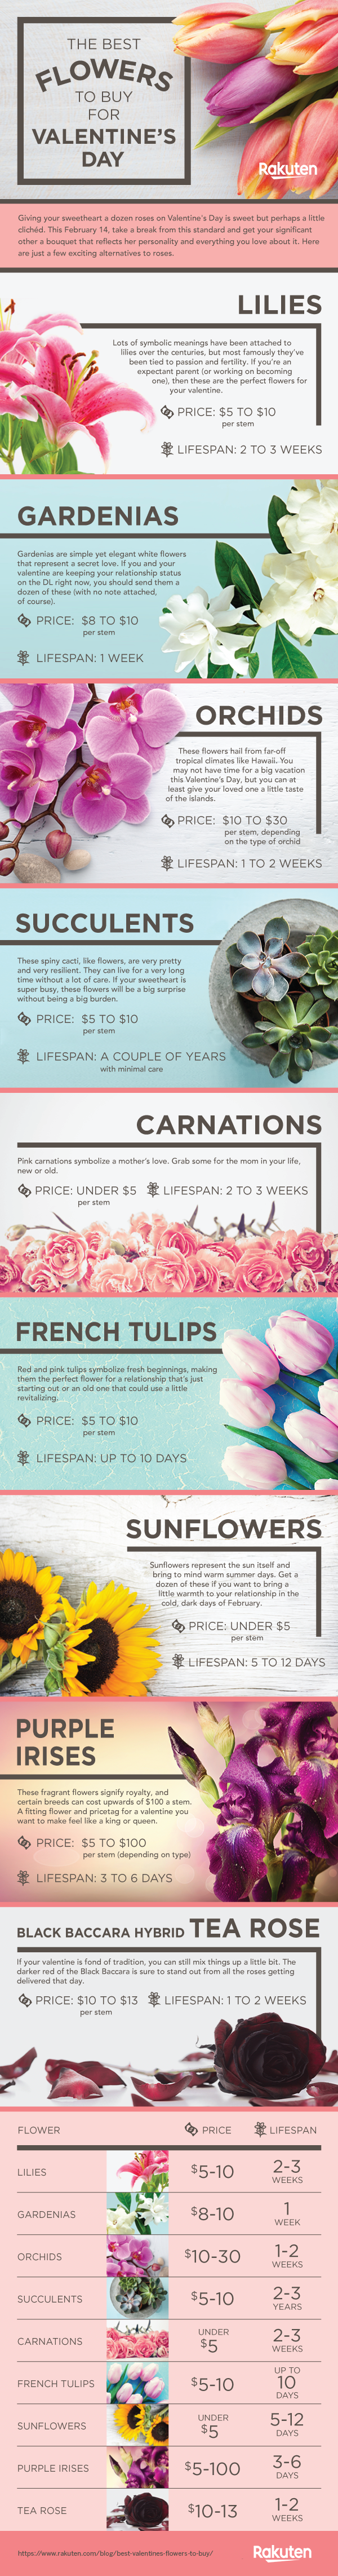 Best Valentine's Flowers to Buy infographic